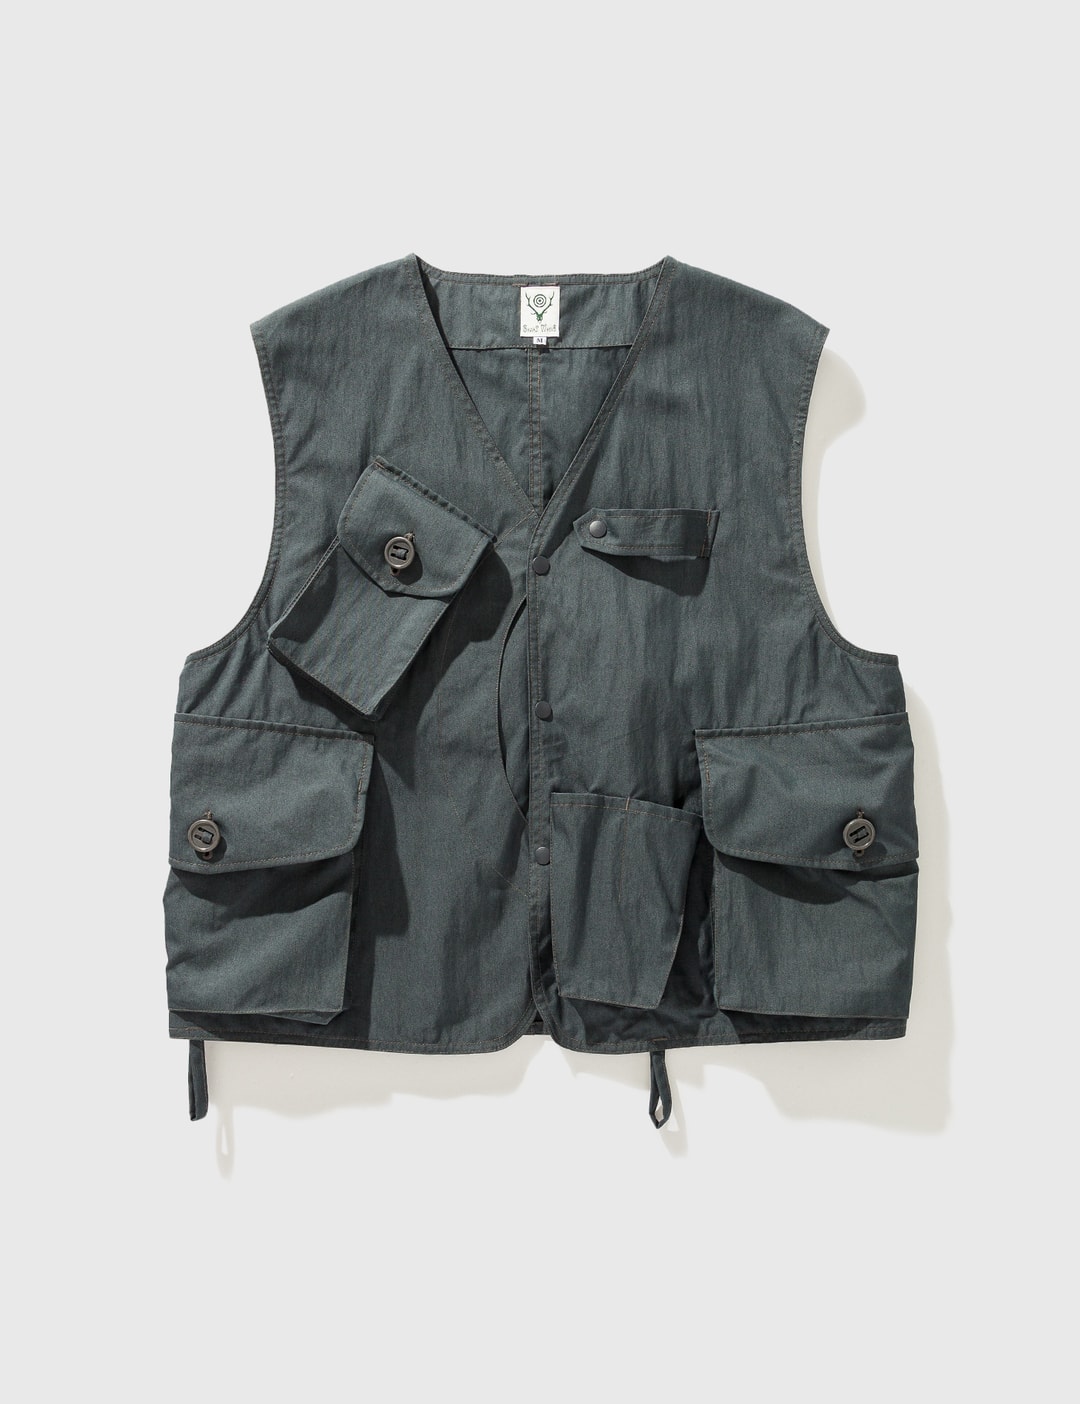 South2 West8 - Tenkara Vest | HBX - Globally Curated Fashion and ...